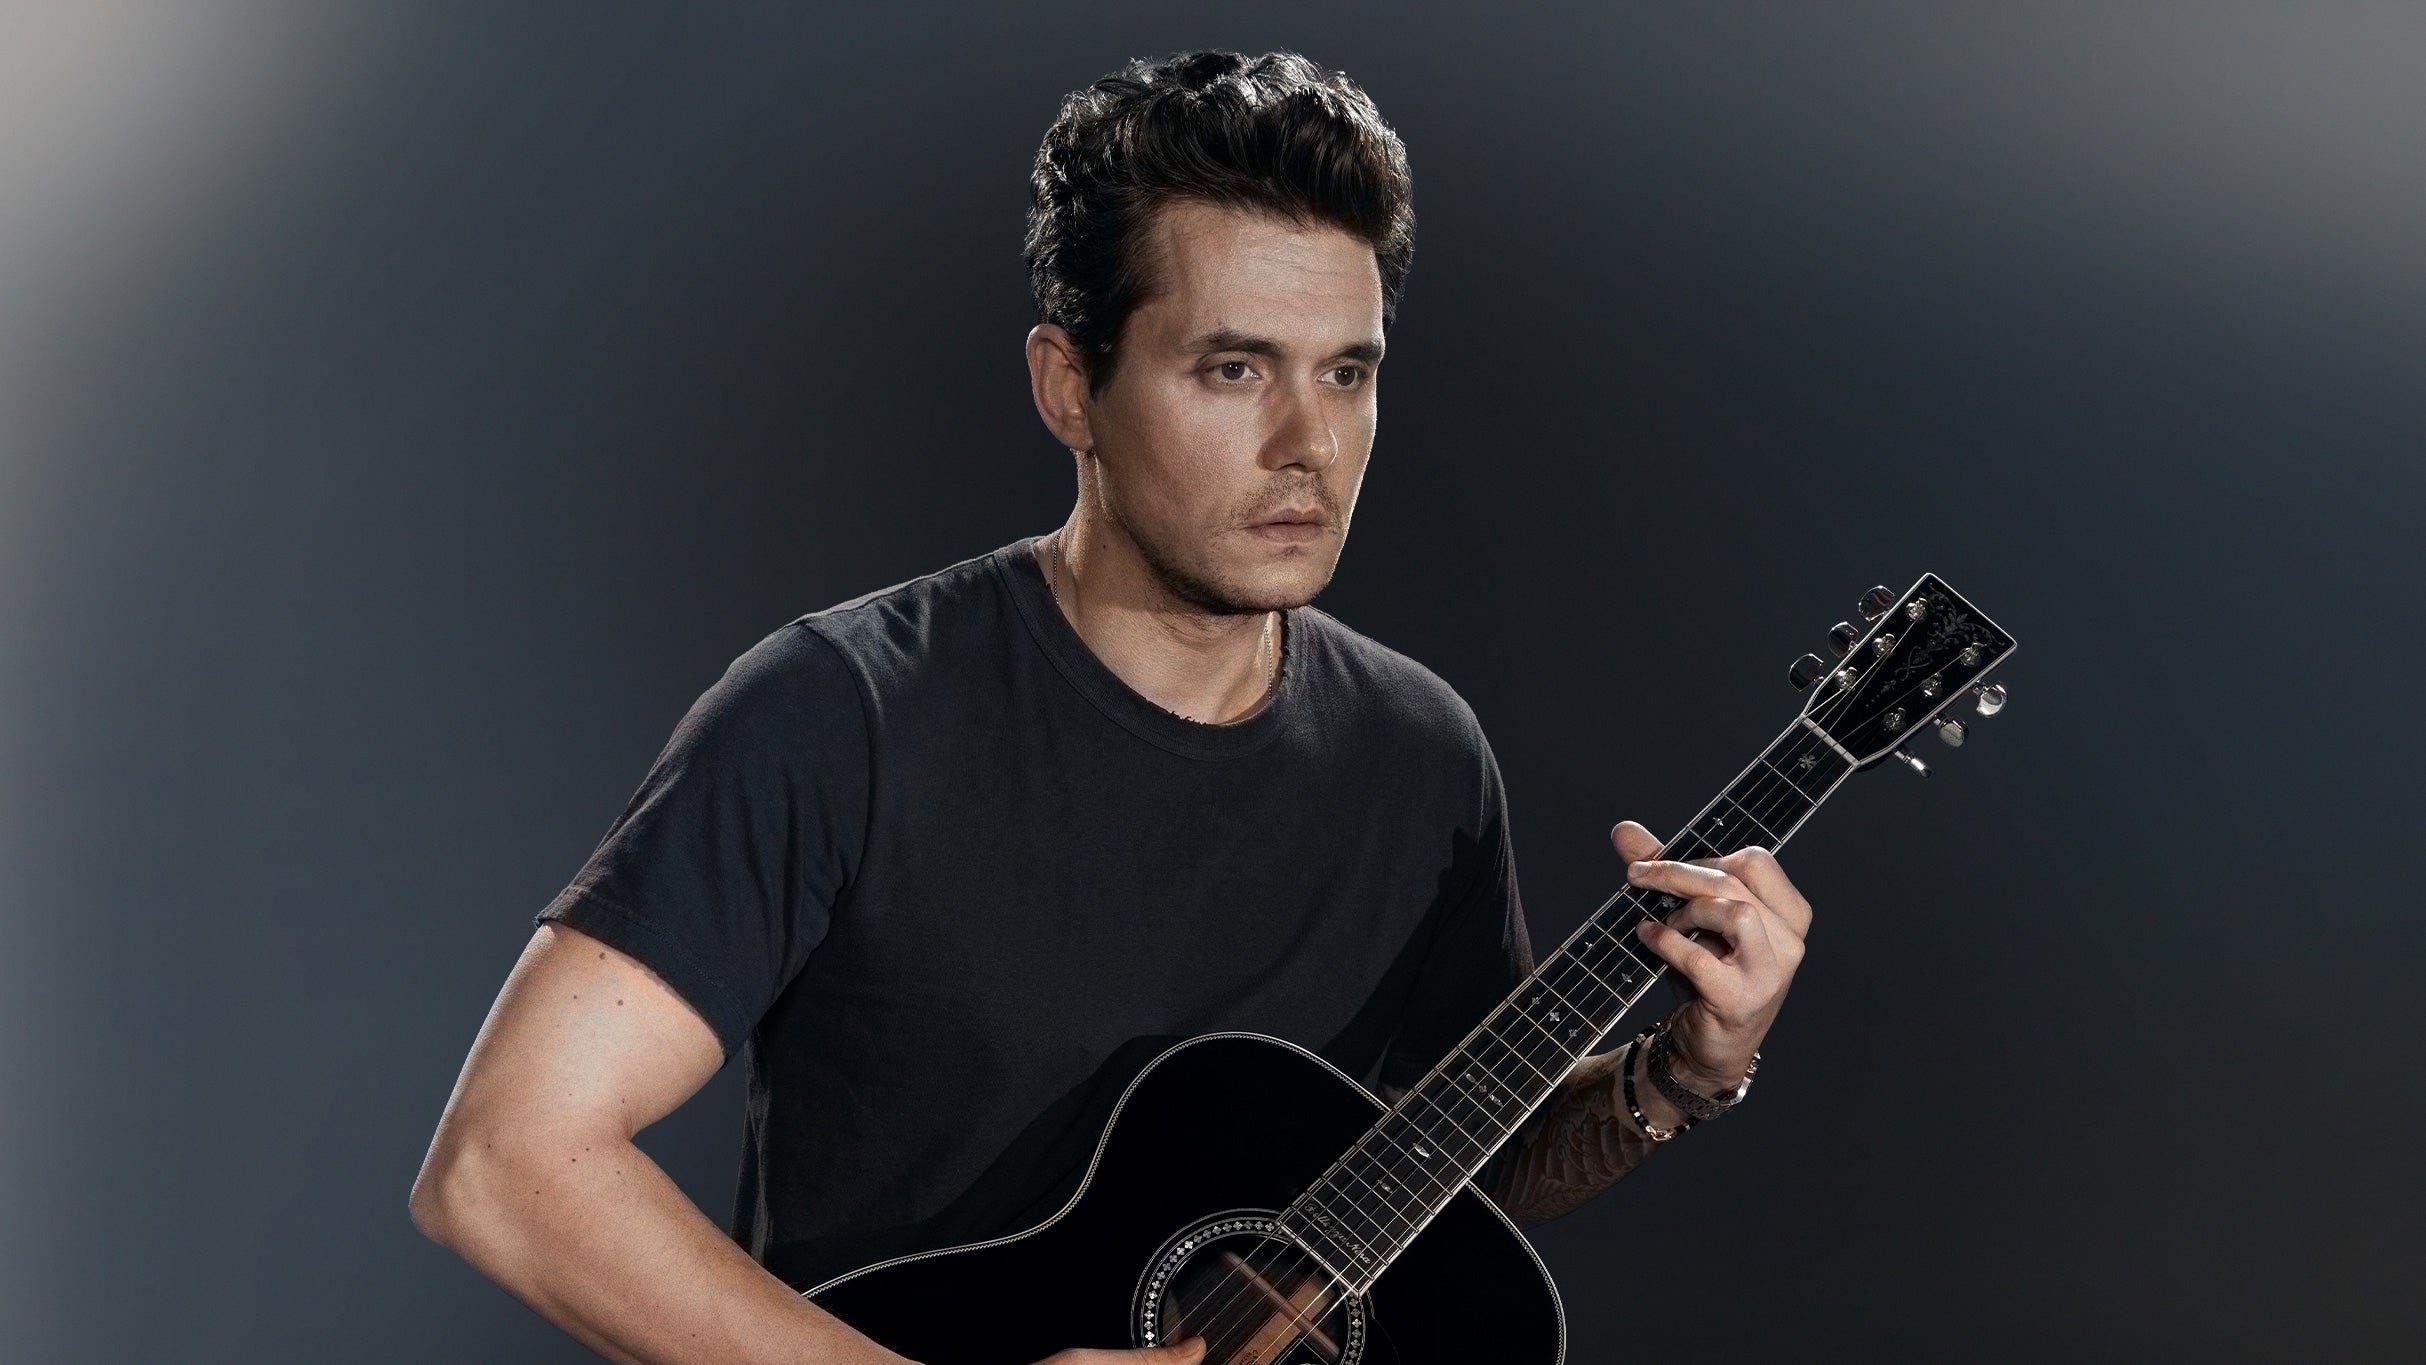 John Mayer - Solo free presale listing for concert tickets in New York, NY (Madison Square Garden)